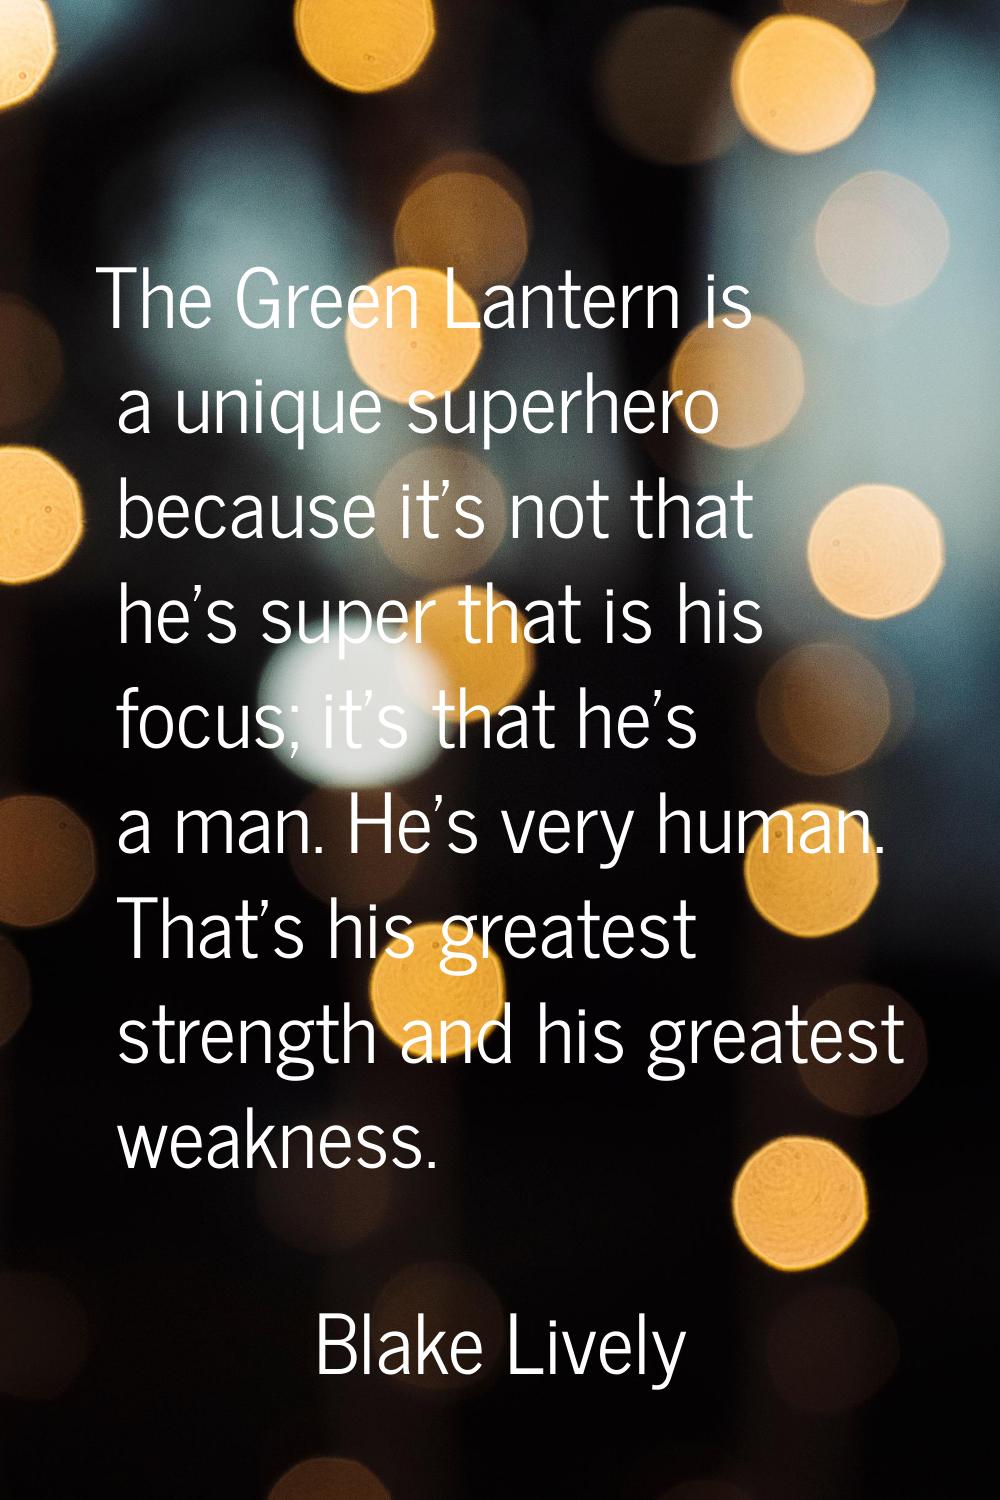 The Green Lantern is a unique superhero because it's not that he's super that is his focus; it's th